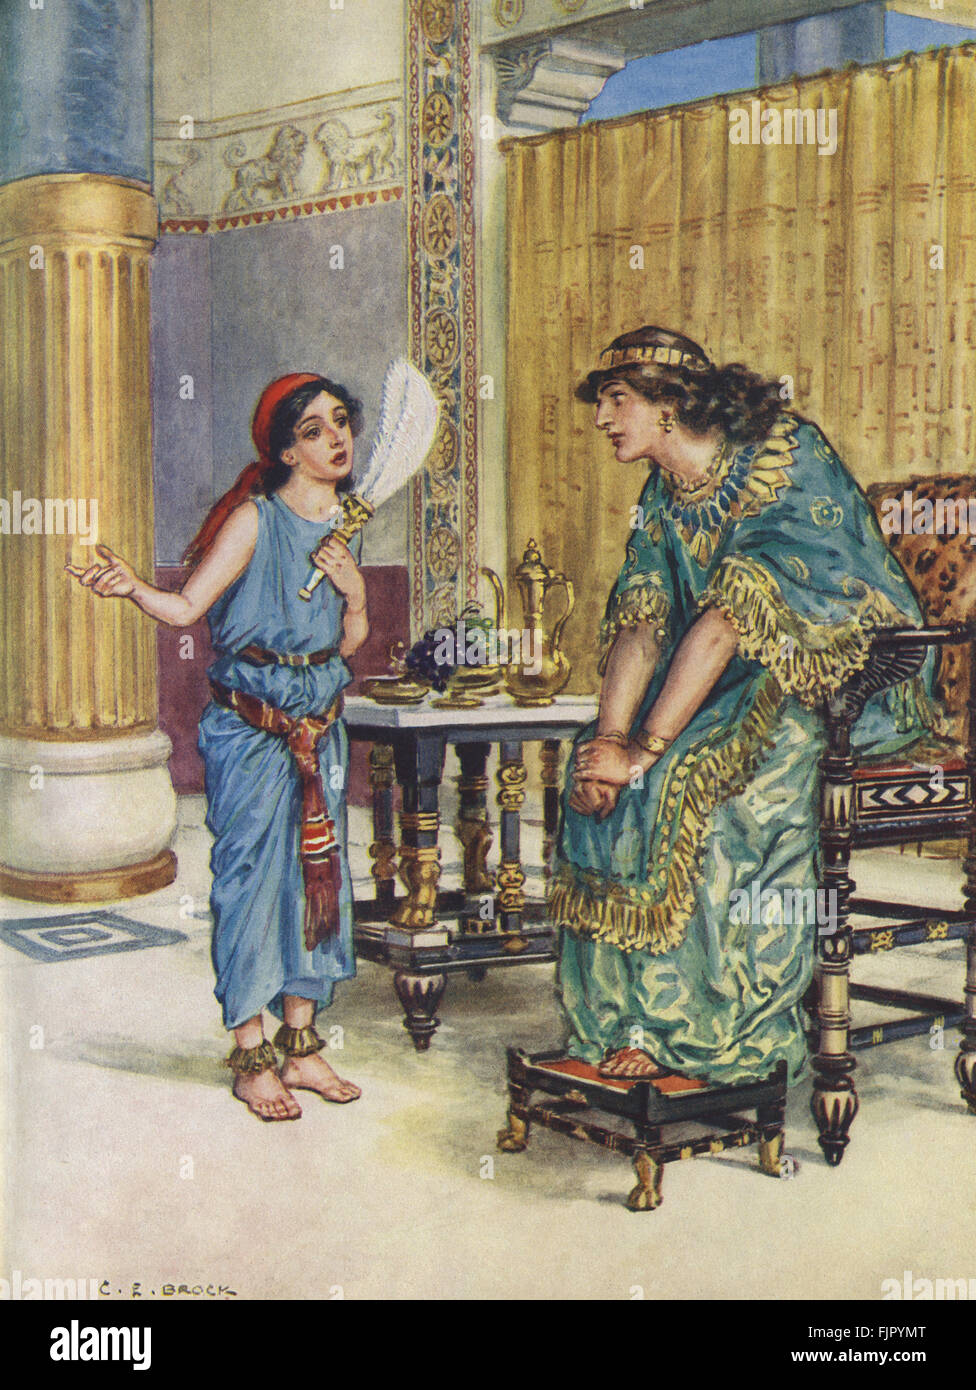 Naaman 's wife is approached by Hebrew slave girl: ''And she said unto her mistress, Would God my lord were with the prophet that is in Samaria! for he would recover him of his leprosy'. (prophet is Elisha) 1I Kings 5 /3. Illustration by C E Brock 1870 -1938 Stock Photo